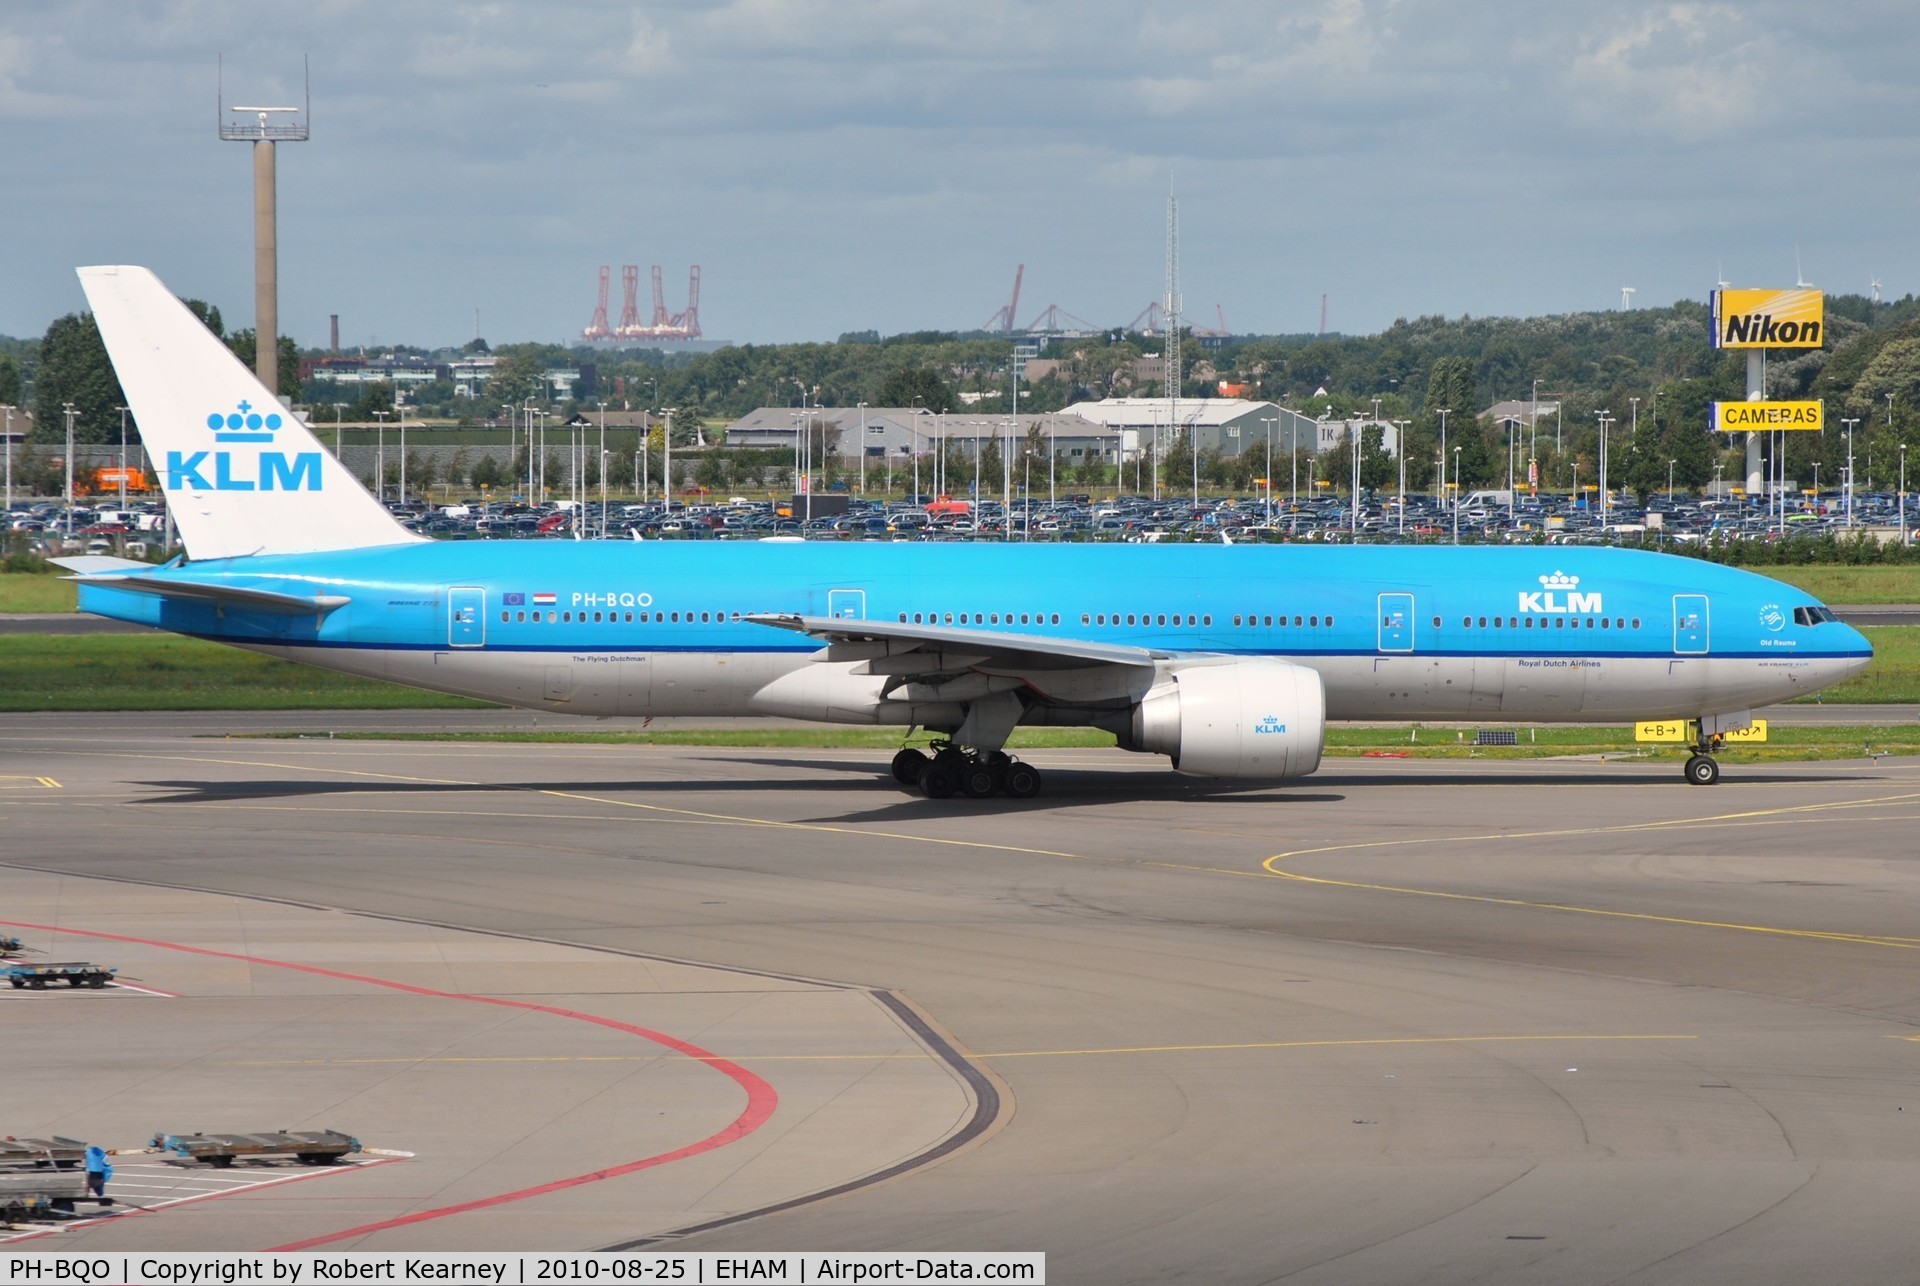 PH-BQO, 2007 Boeing 777-206/ER C/N 35295, KLM heavy taxiing around for departure